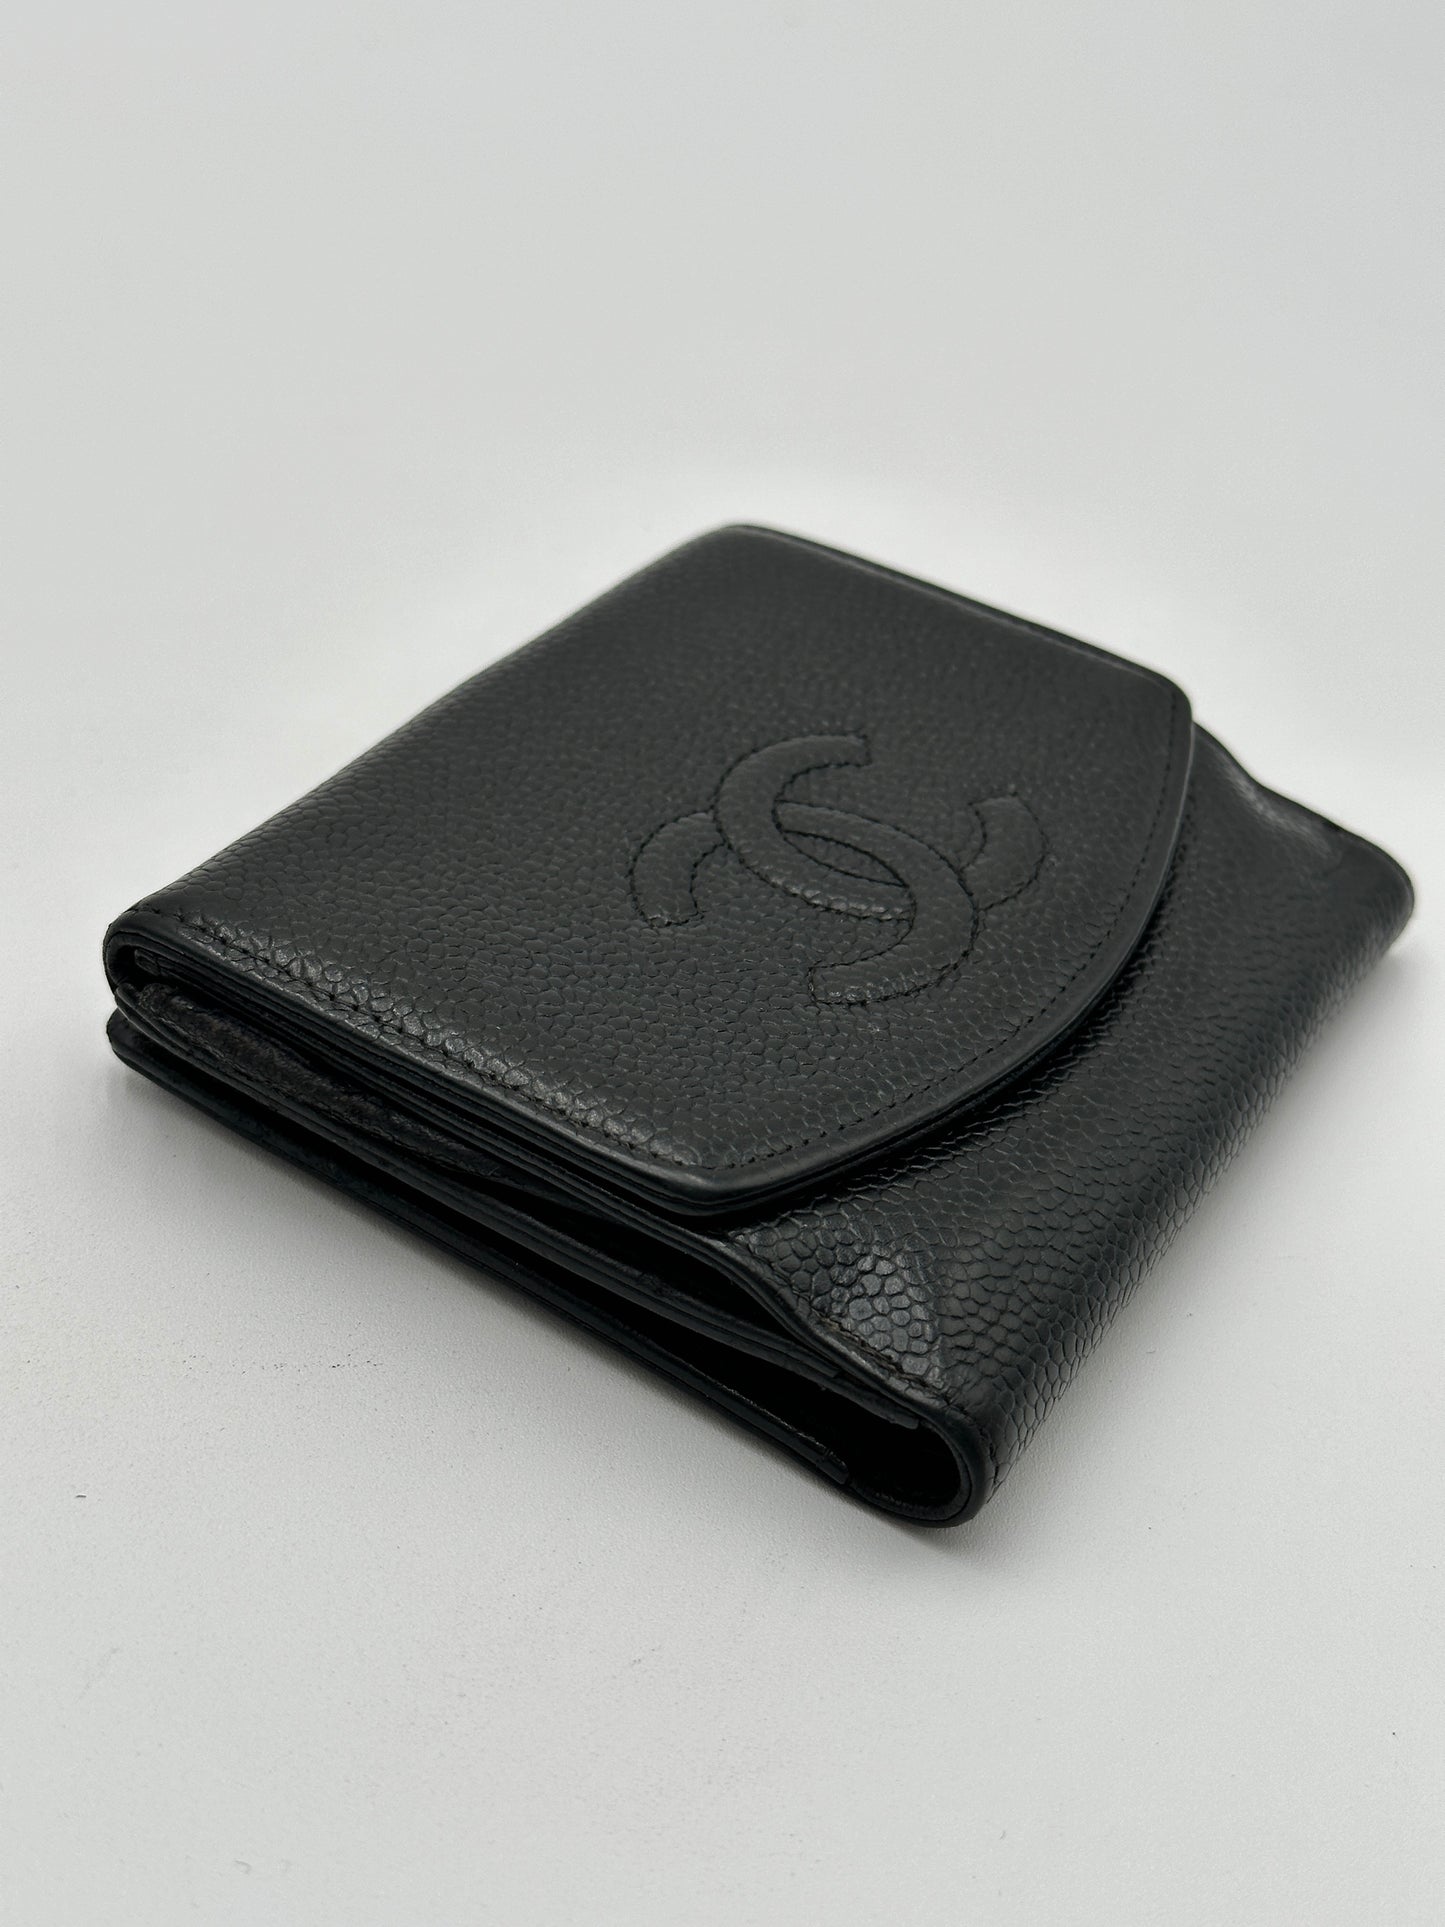 Authentic CHANEL CC Caviar Bifold Compact wallet